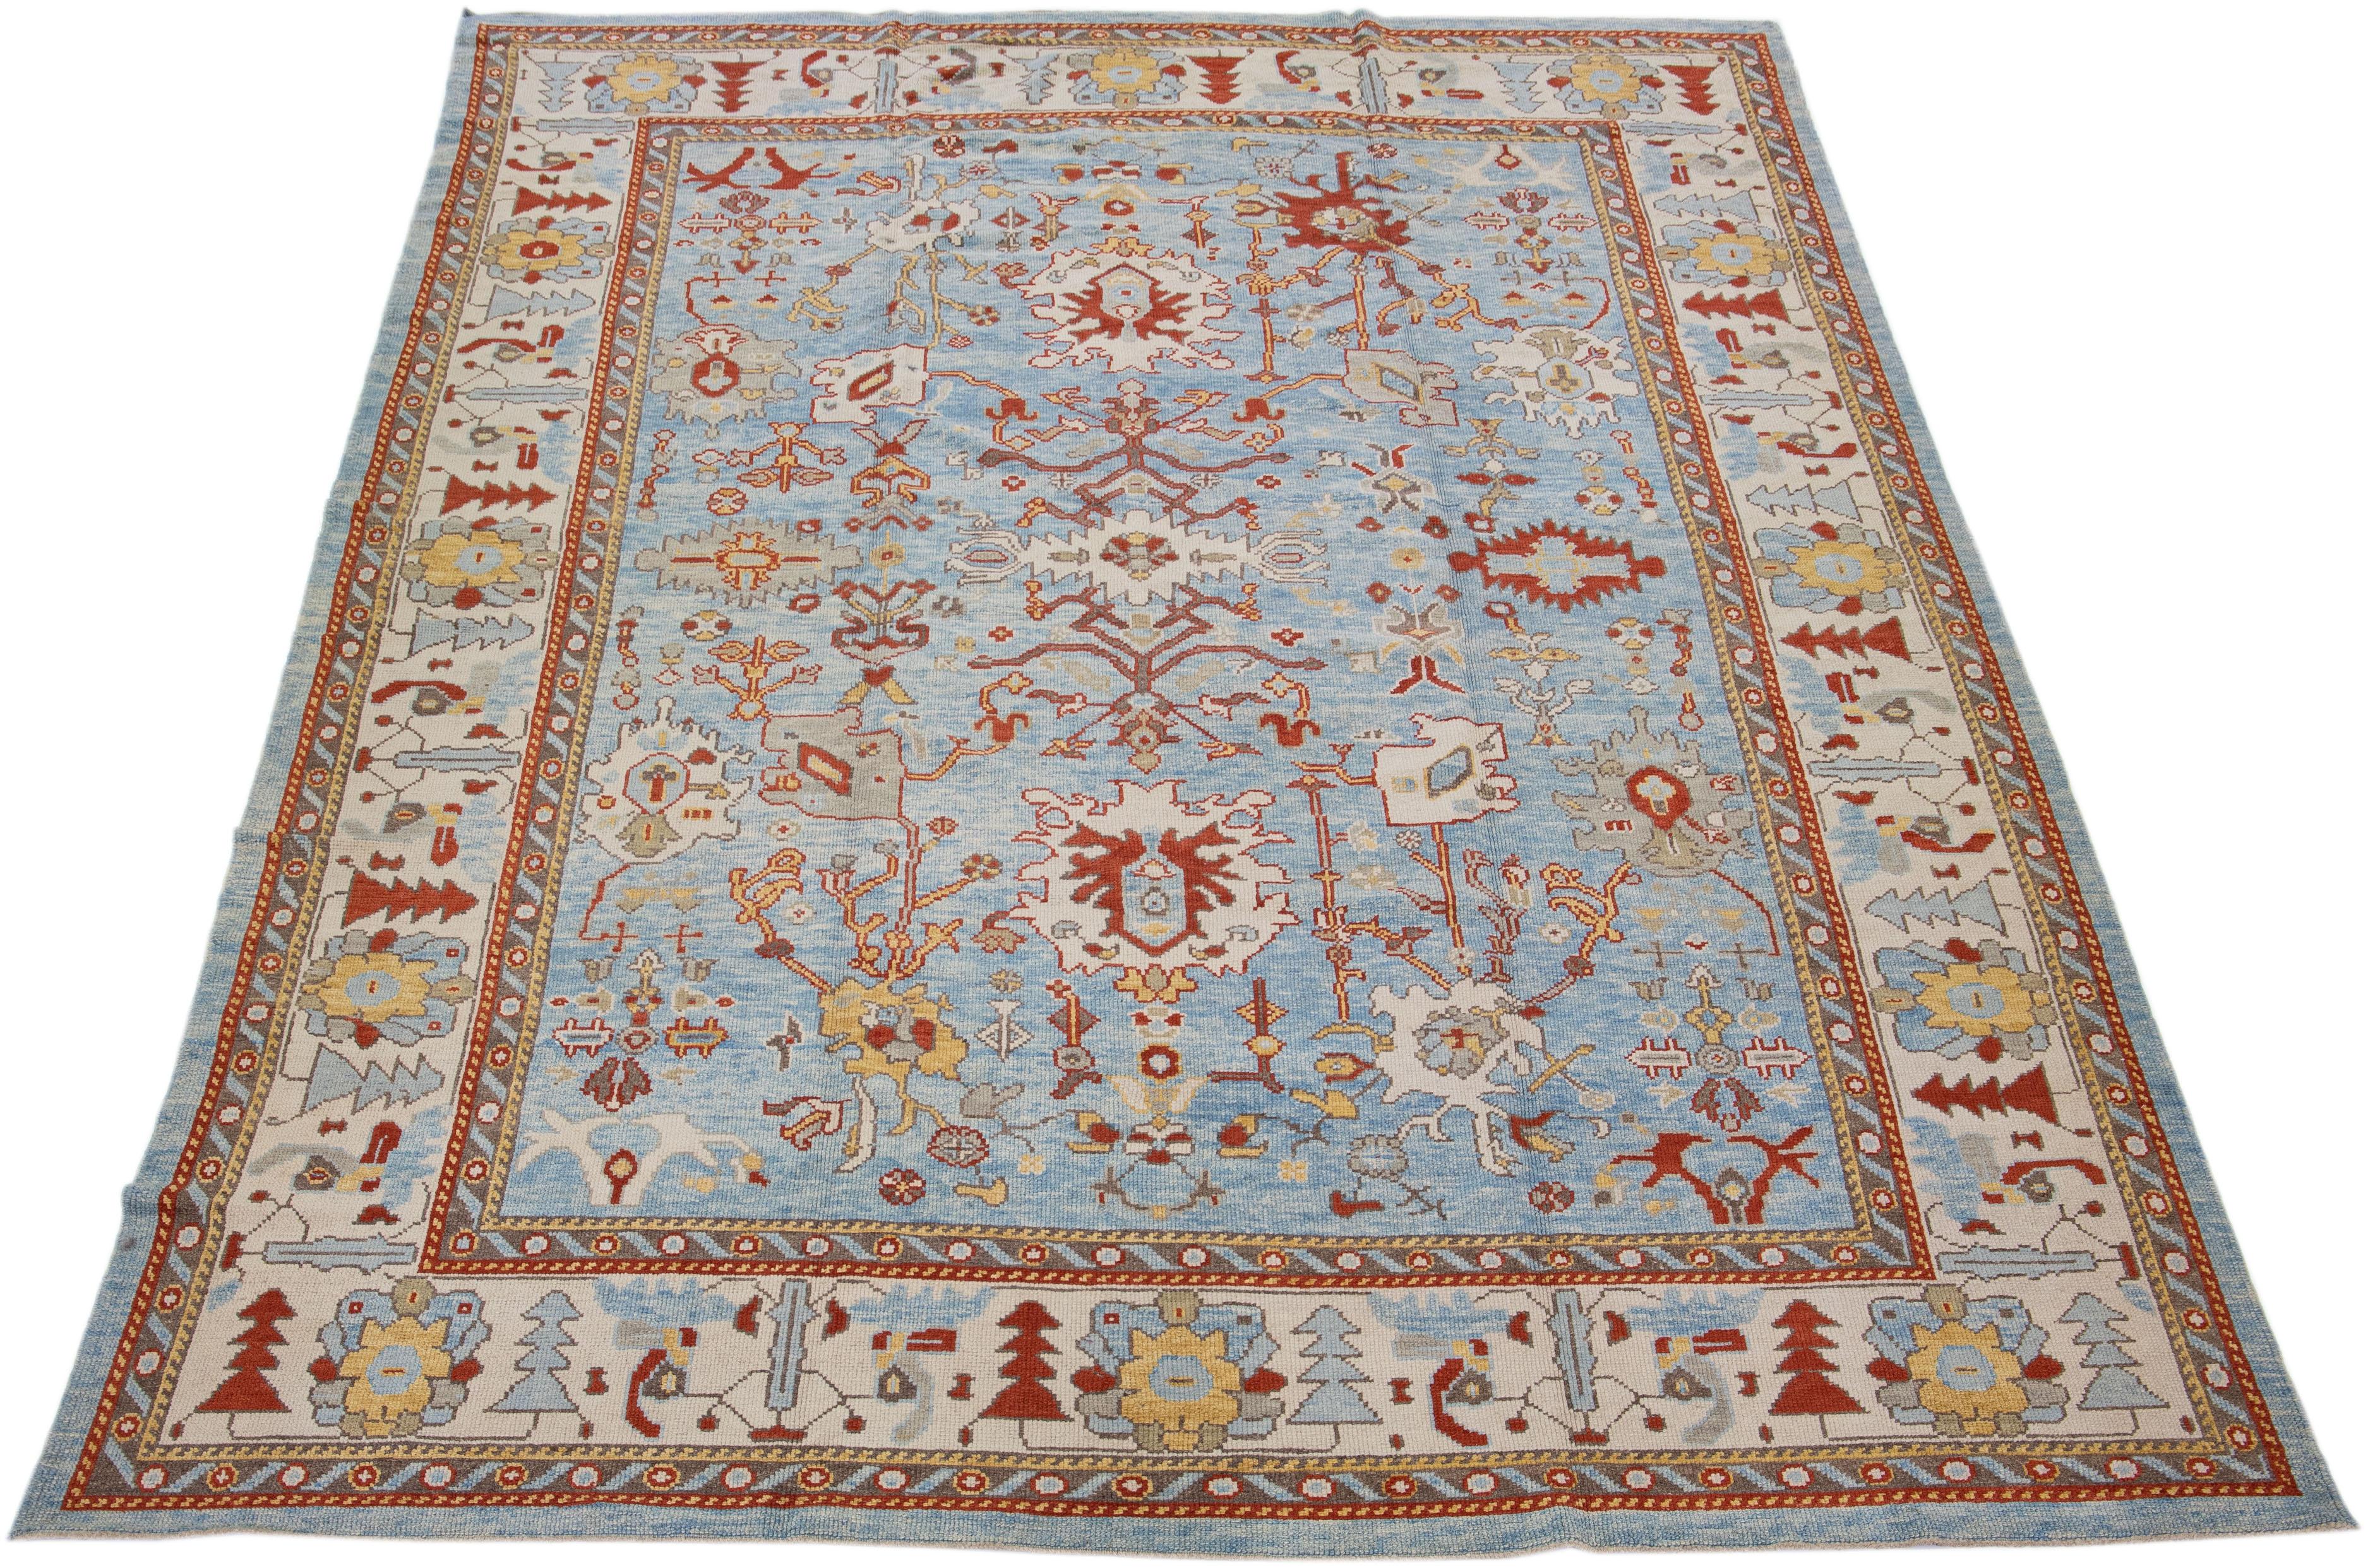 Beautiful modern Oushak hand-knotted wool rug with a blue color field. This Turkish Piece has a beige frame with rust, yellow, and gray accent colors in a gorgeous all-over floral design.

This rug measures: 9'2